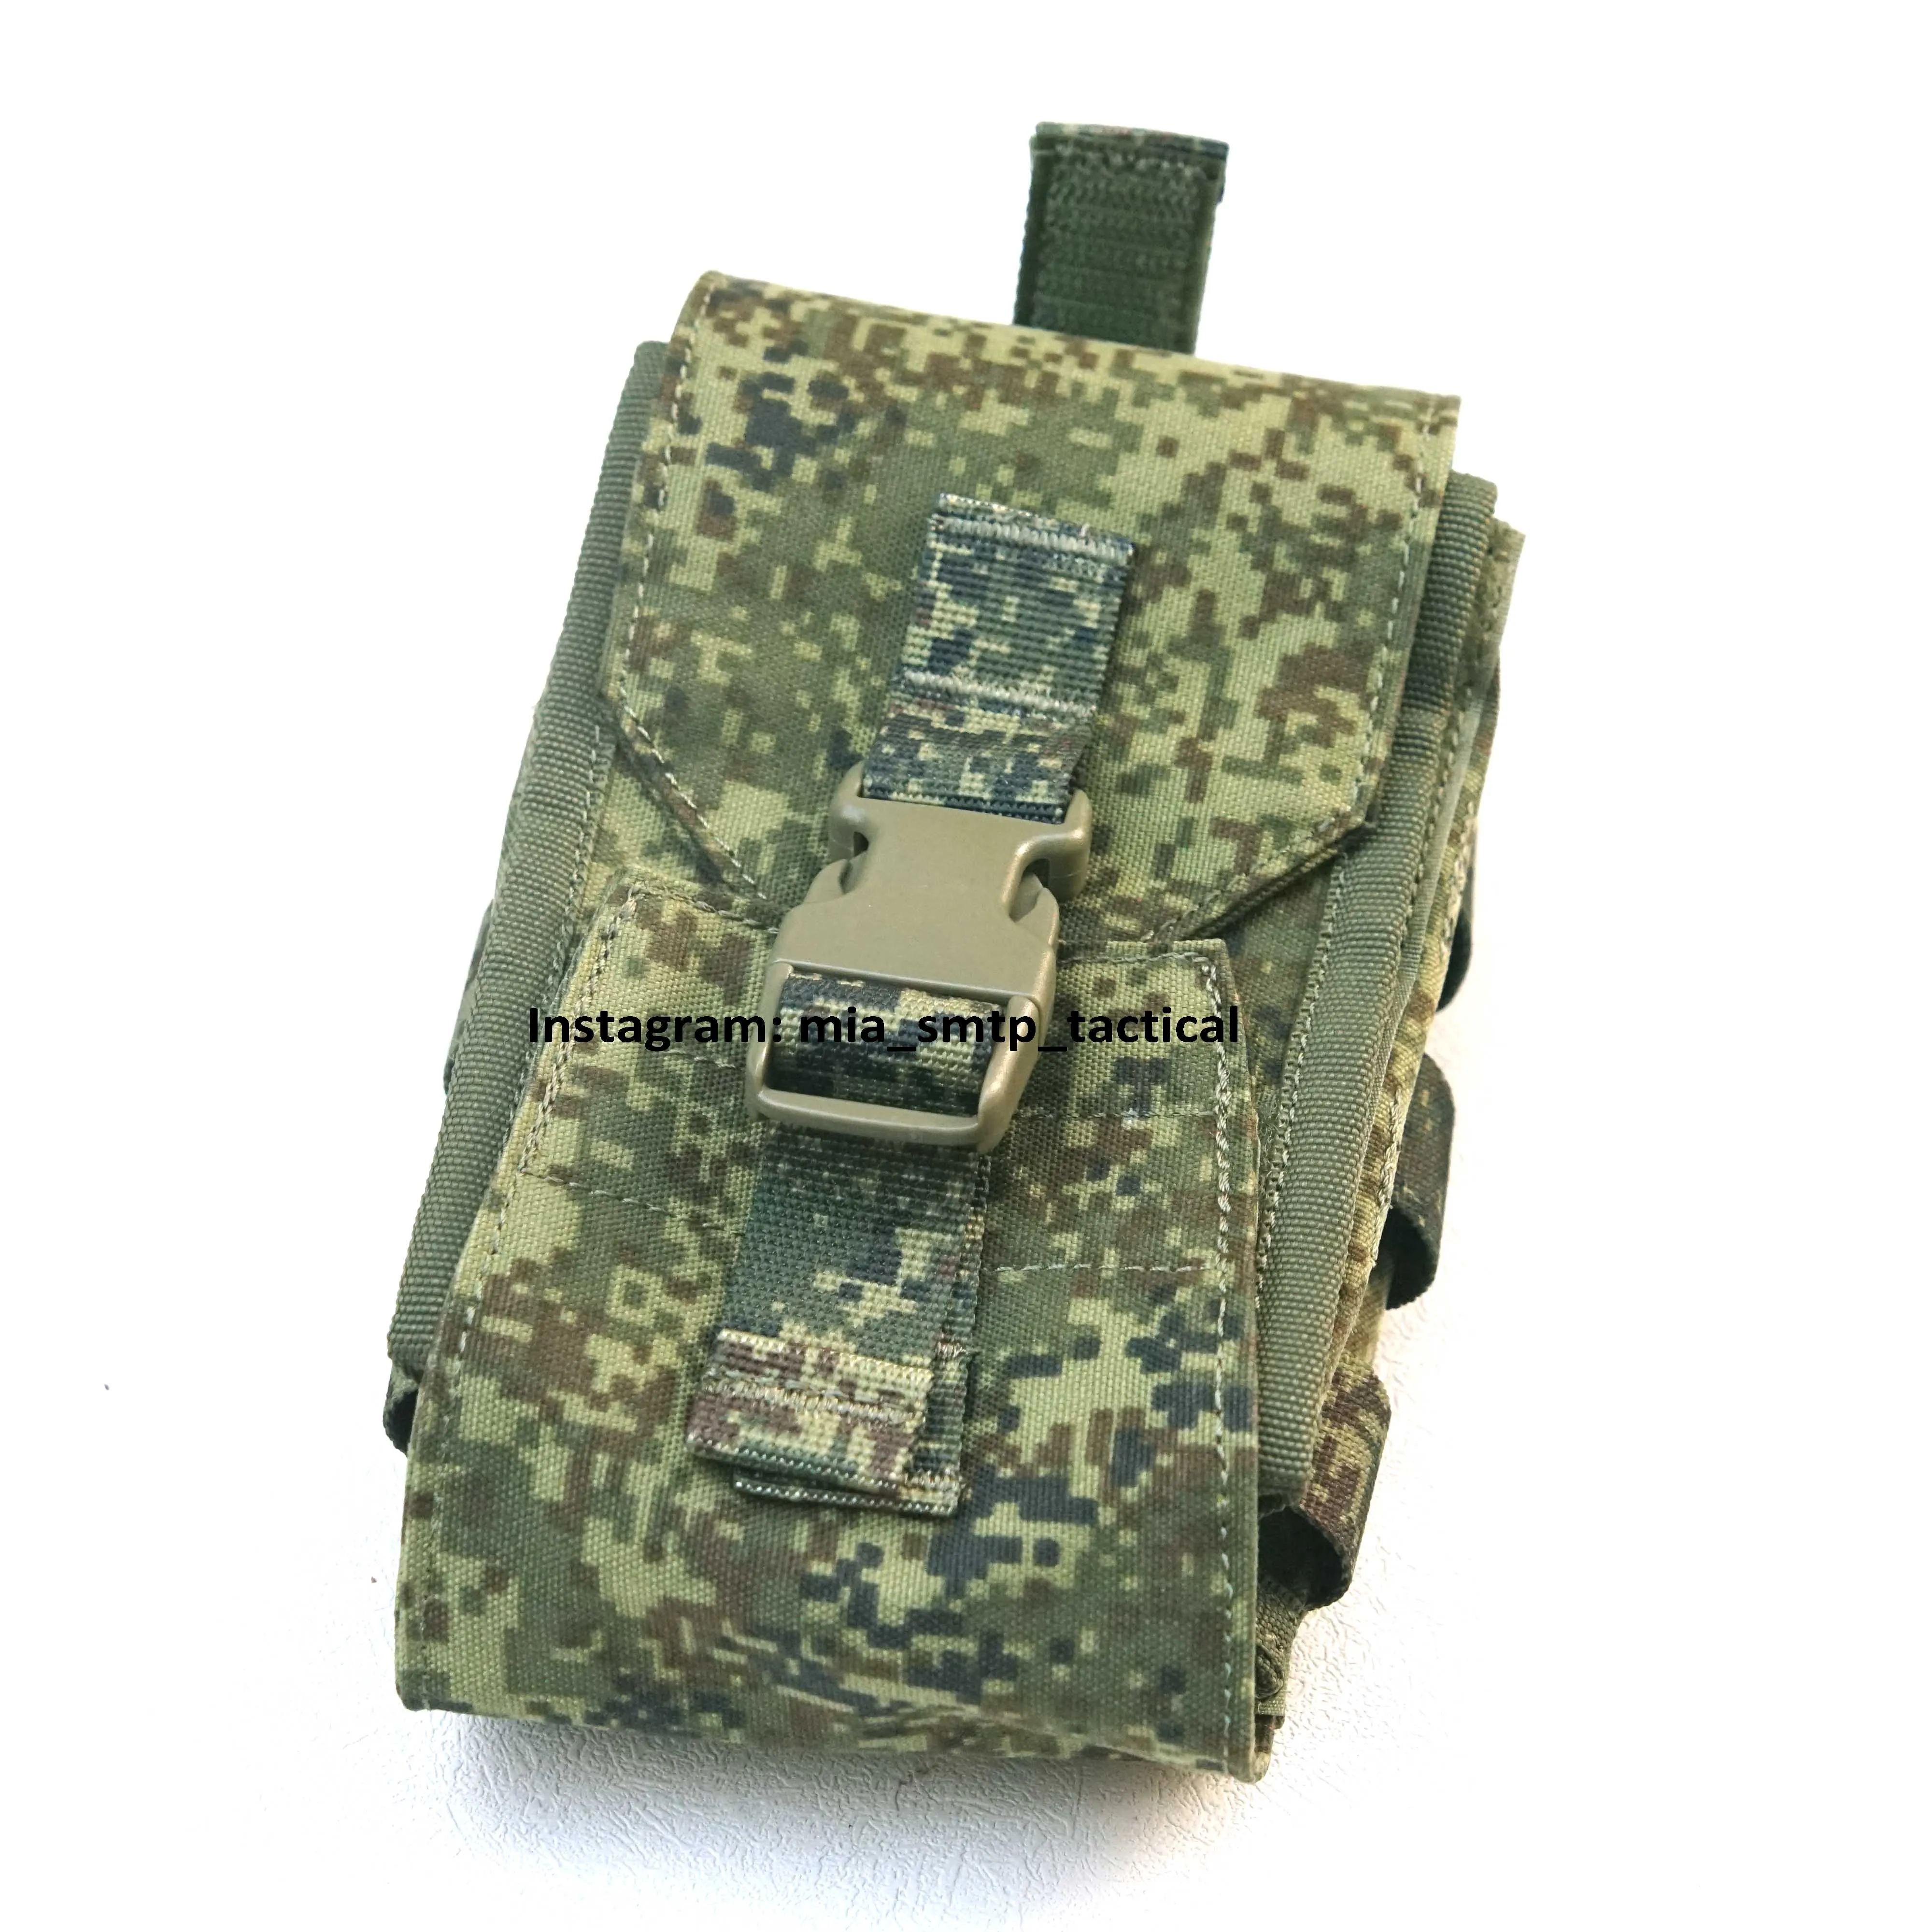 

SMTP WE517-1 Russian Army emr medical pouch little green man EMR medical Pouch Russian army camo afak pouch with molle seystem